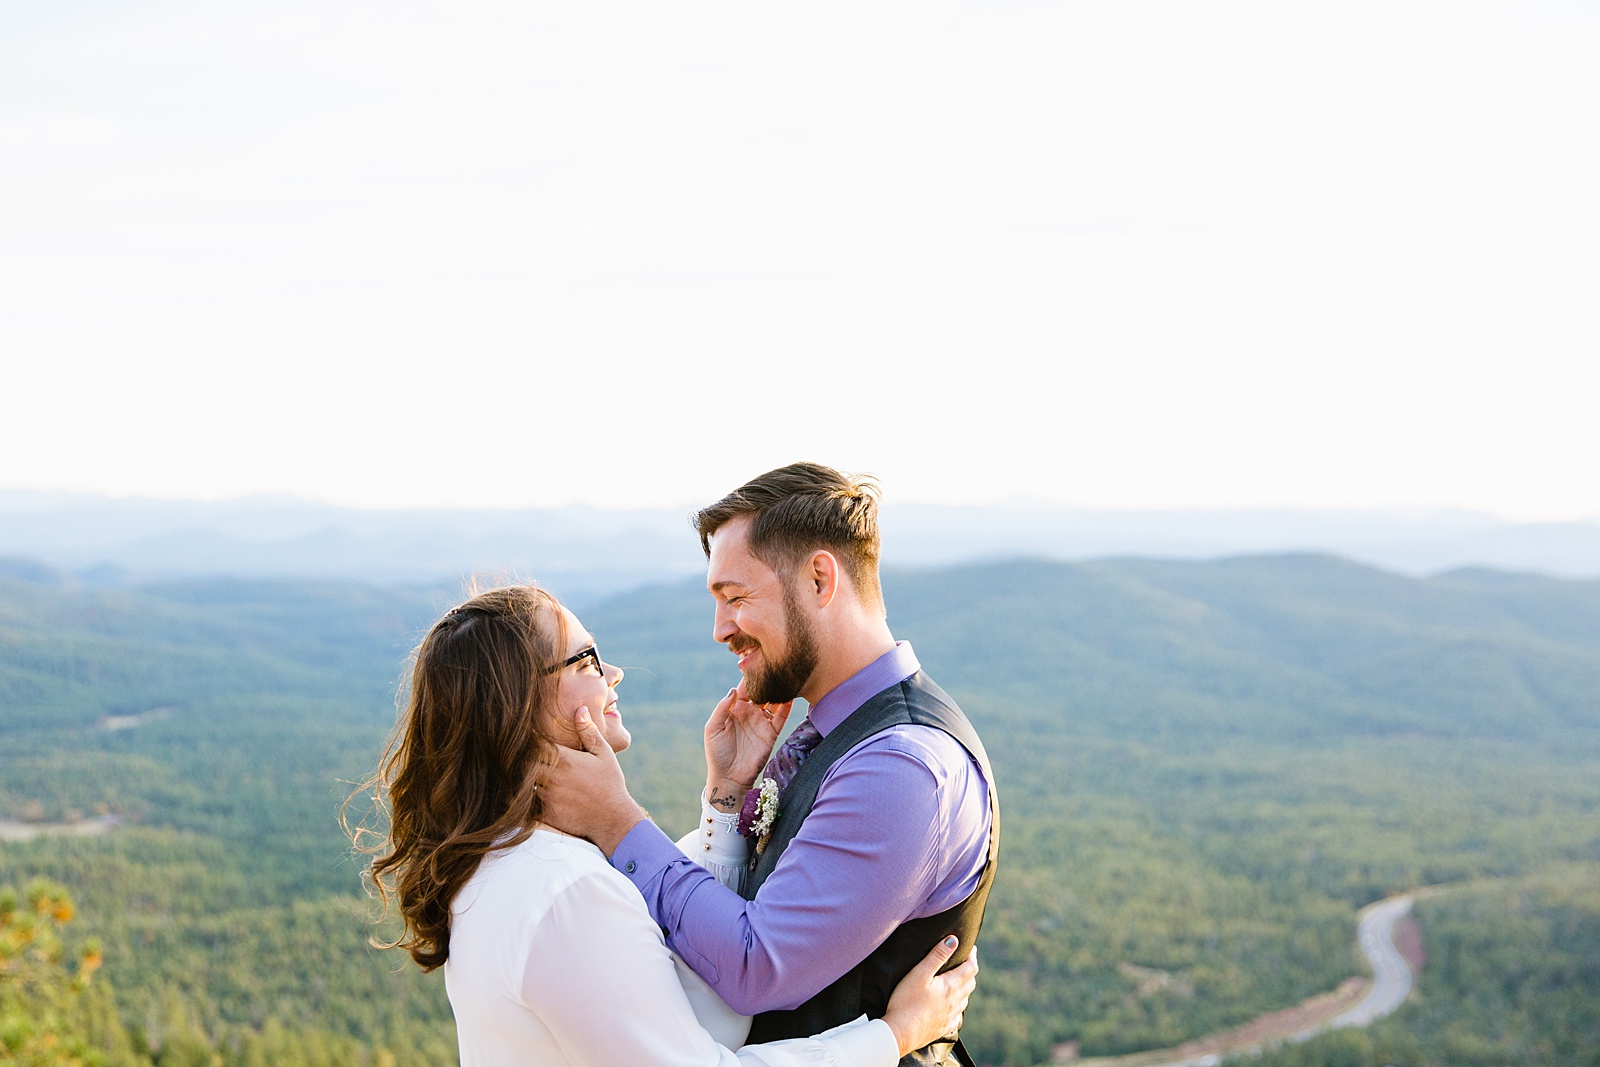 Bride and Groom share and intimate moment after their first kiss during their wedding ceremony at Mogollon Rim by Arizona elopement photographer PMA Photography.